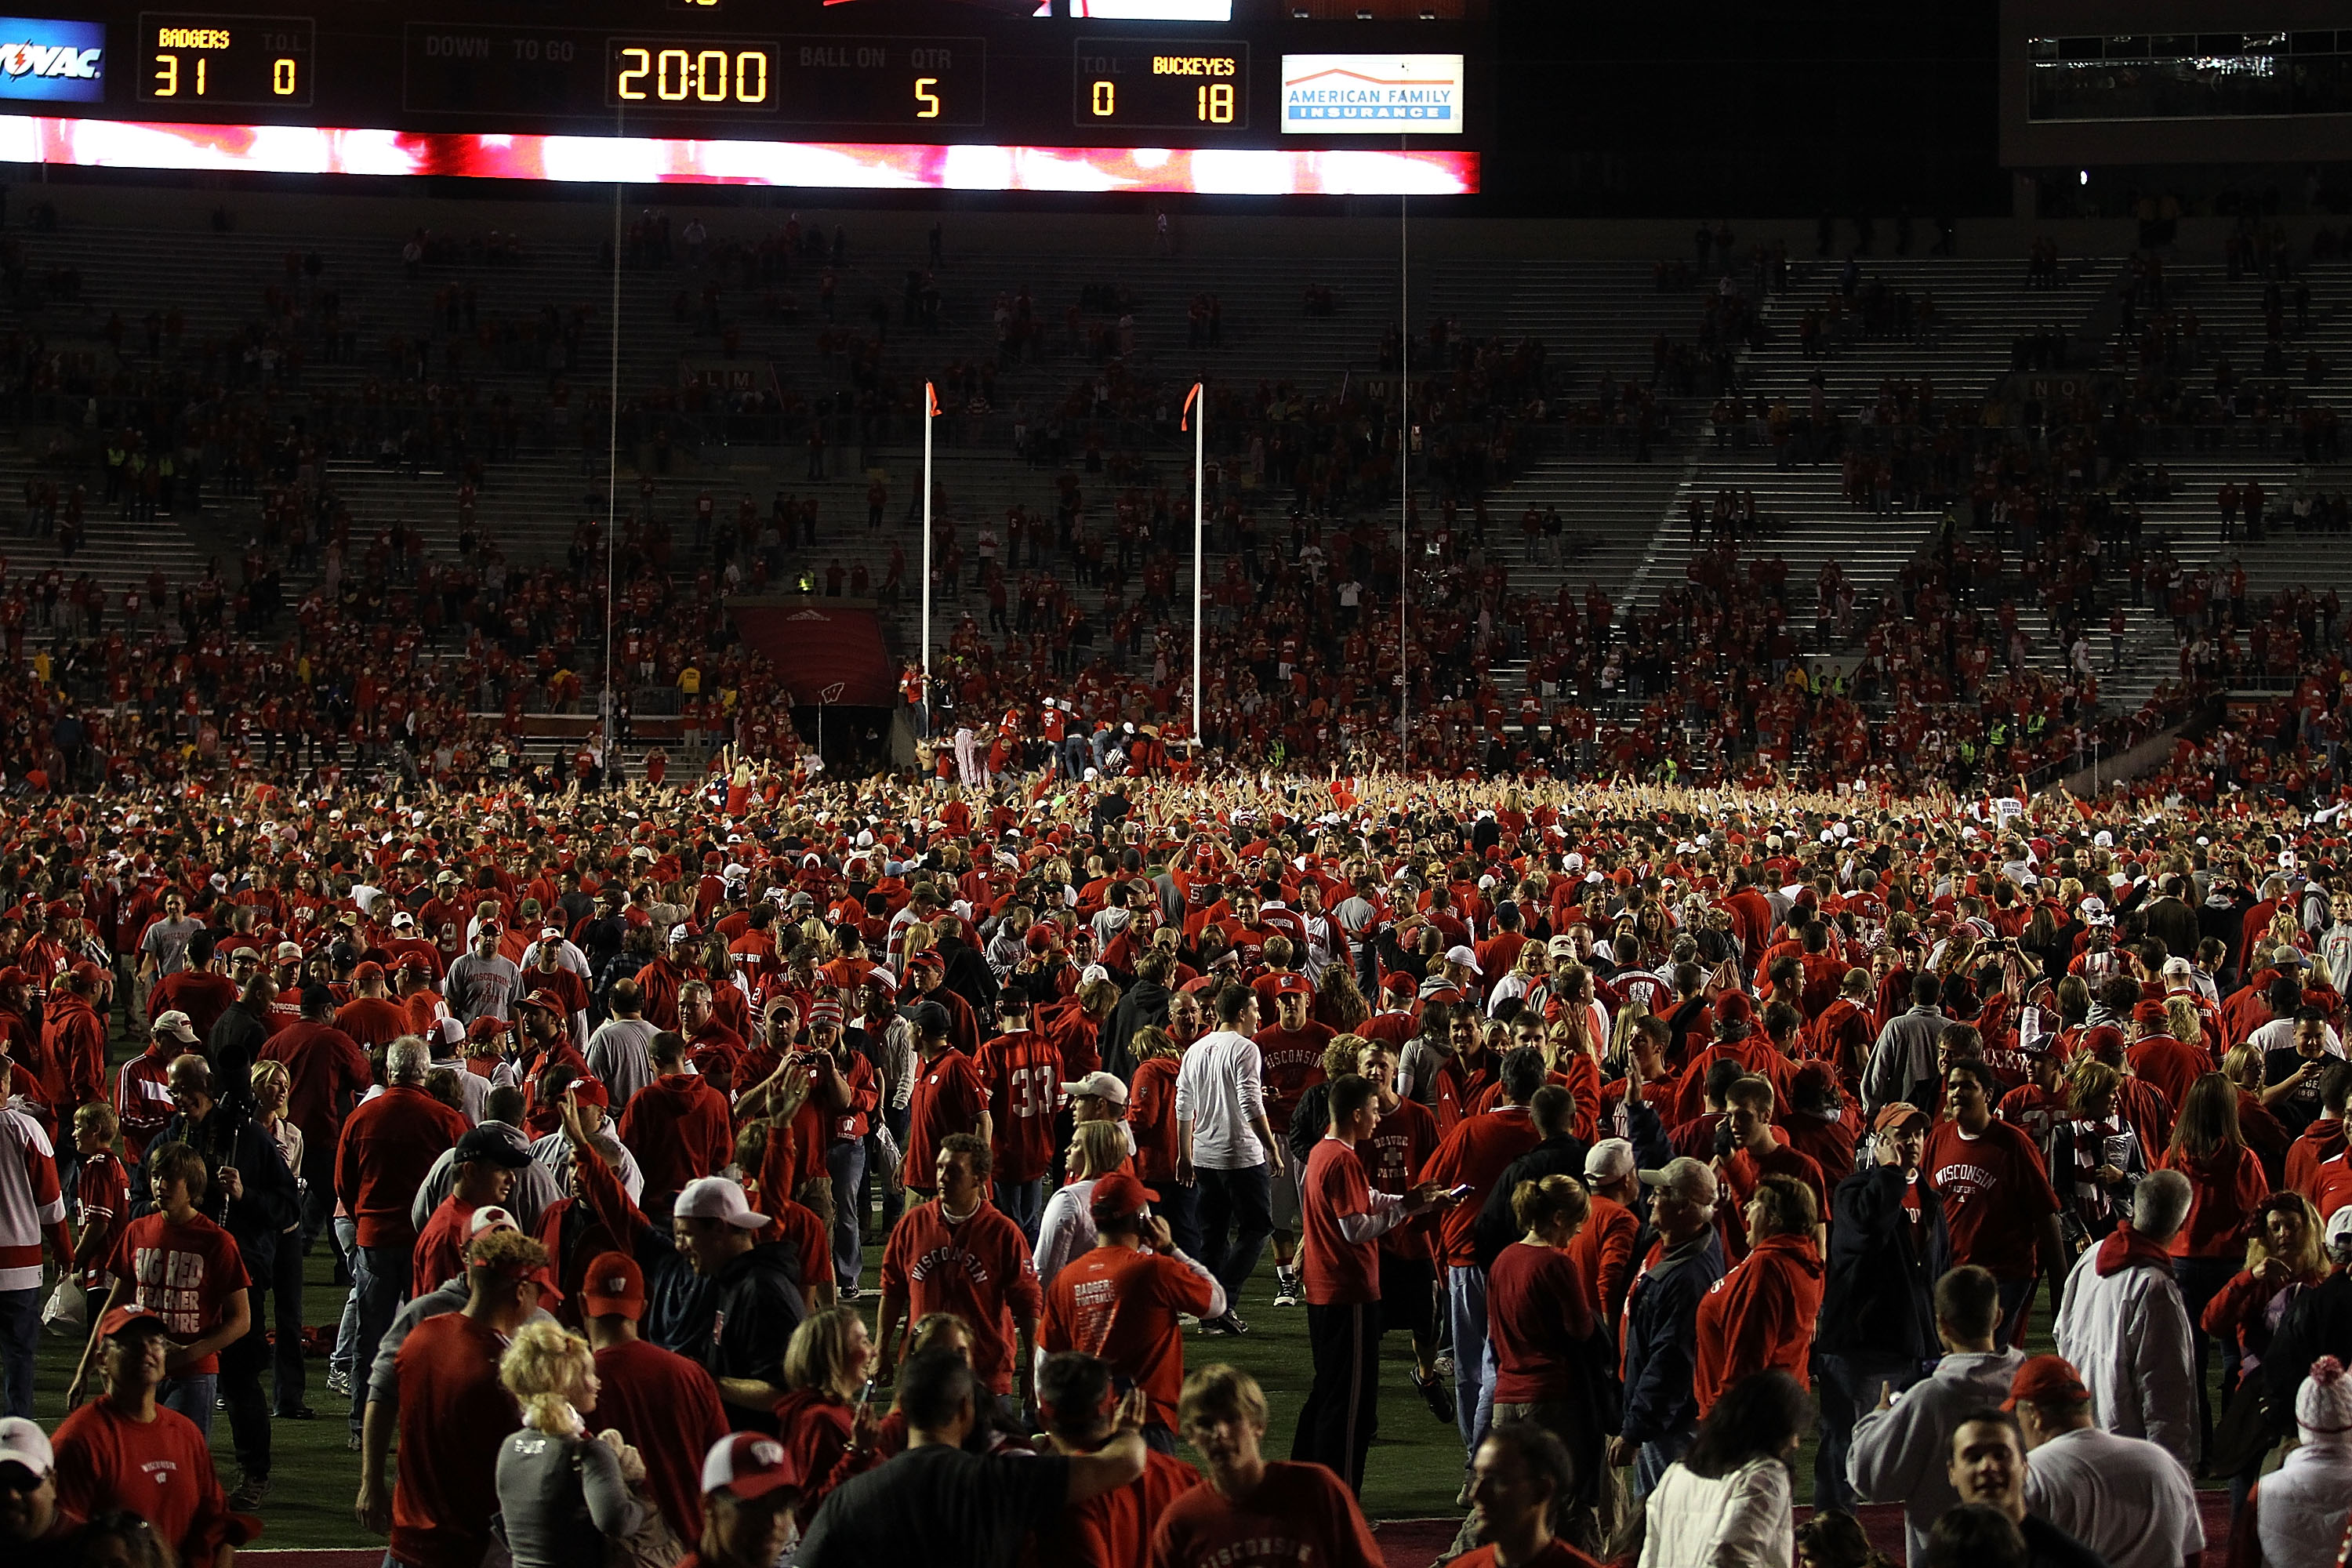 MADISON, WI - OCTOBER 16: Fans of the Wisconsin Badgers poor on to the field following a win against the Ohio State Buckeyes at Camp Randall Stadium on October 16, 2010 in Madison, Wisconsin. Wisconsin defeated Ohio State 31-18. (Photo by Jonathan Daniel/